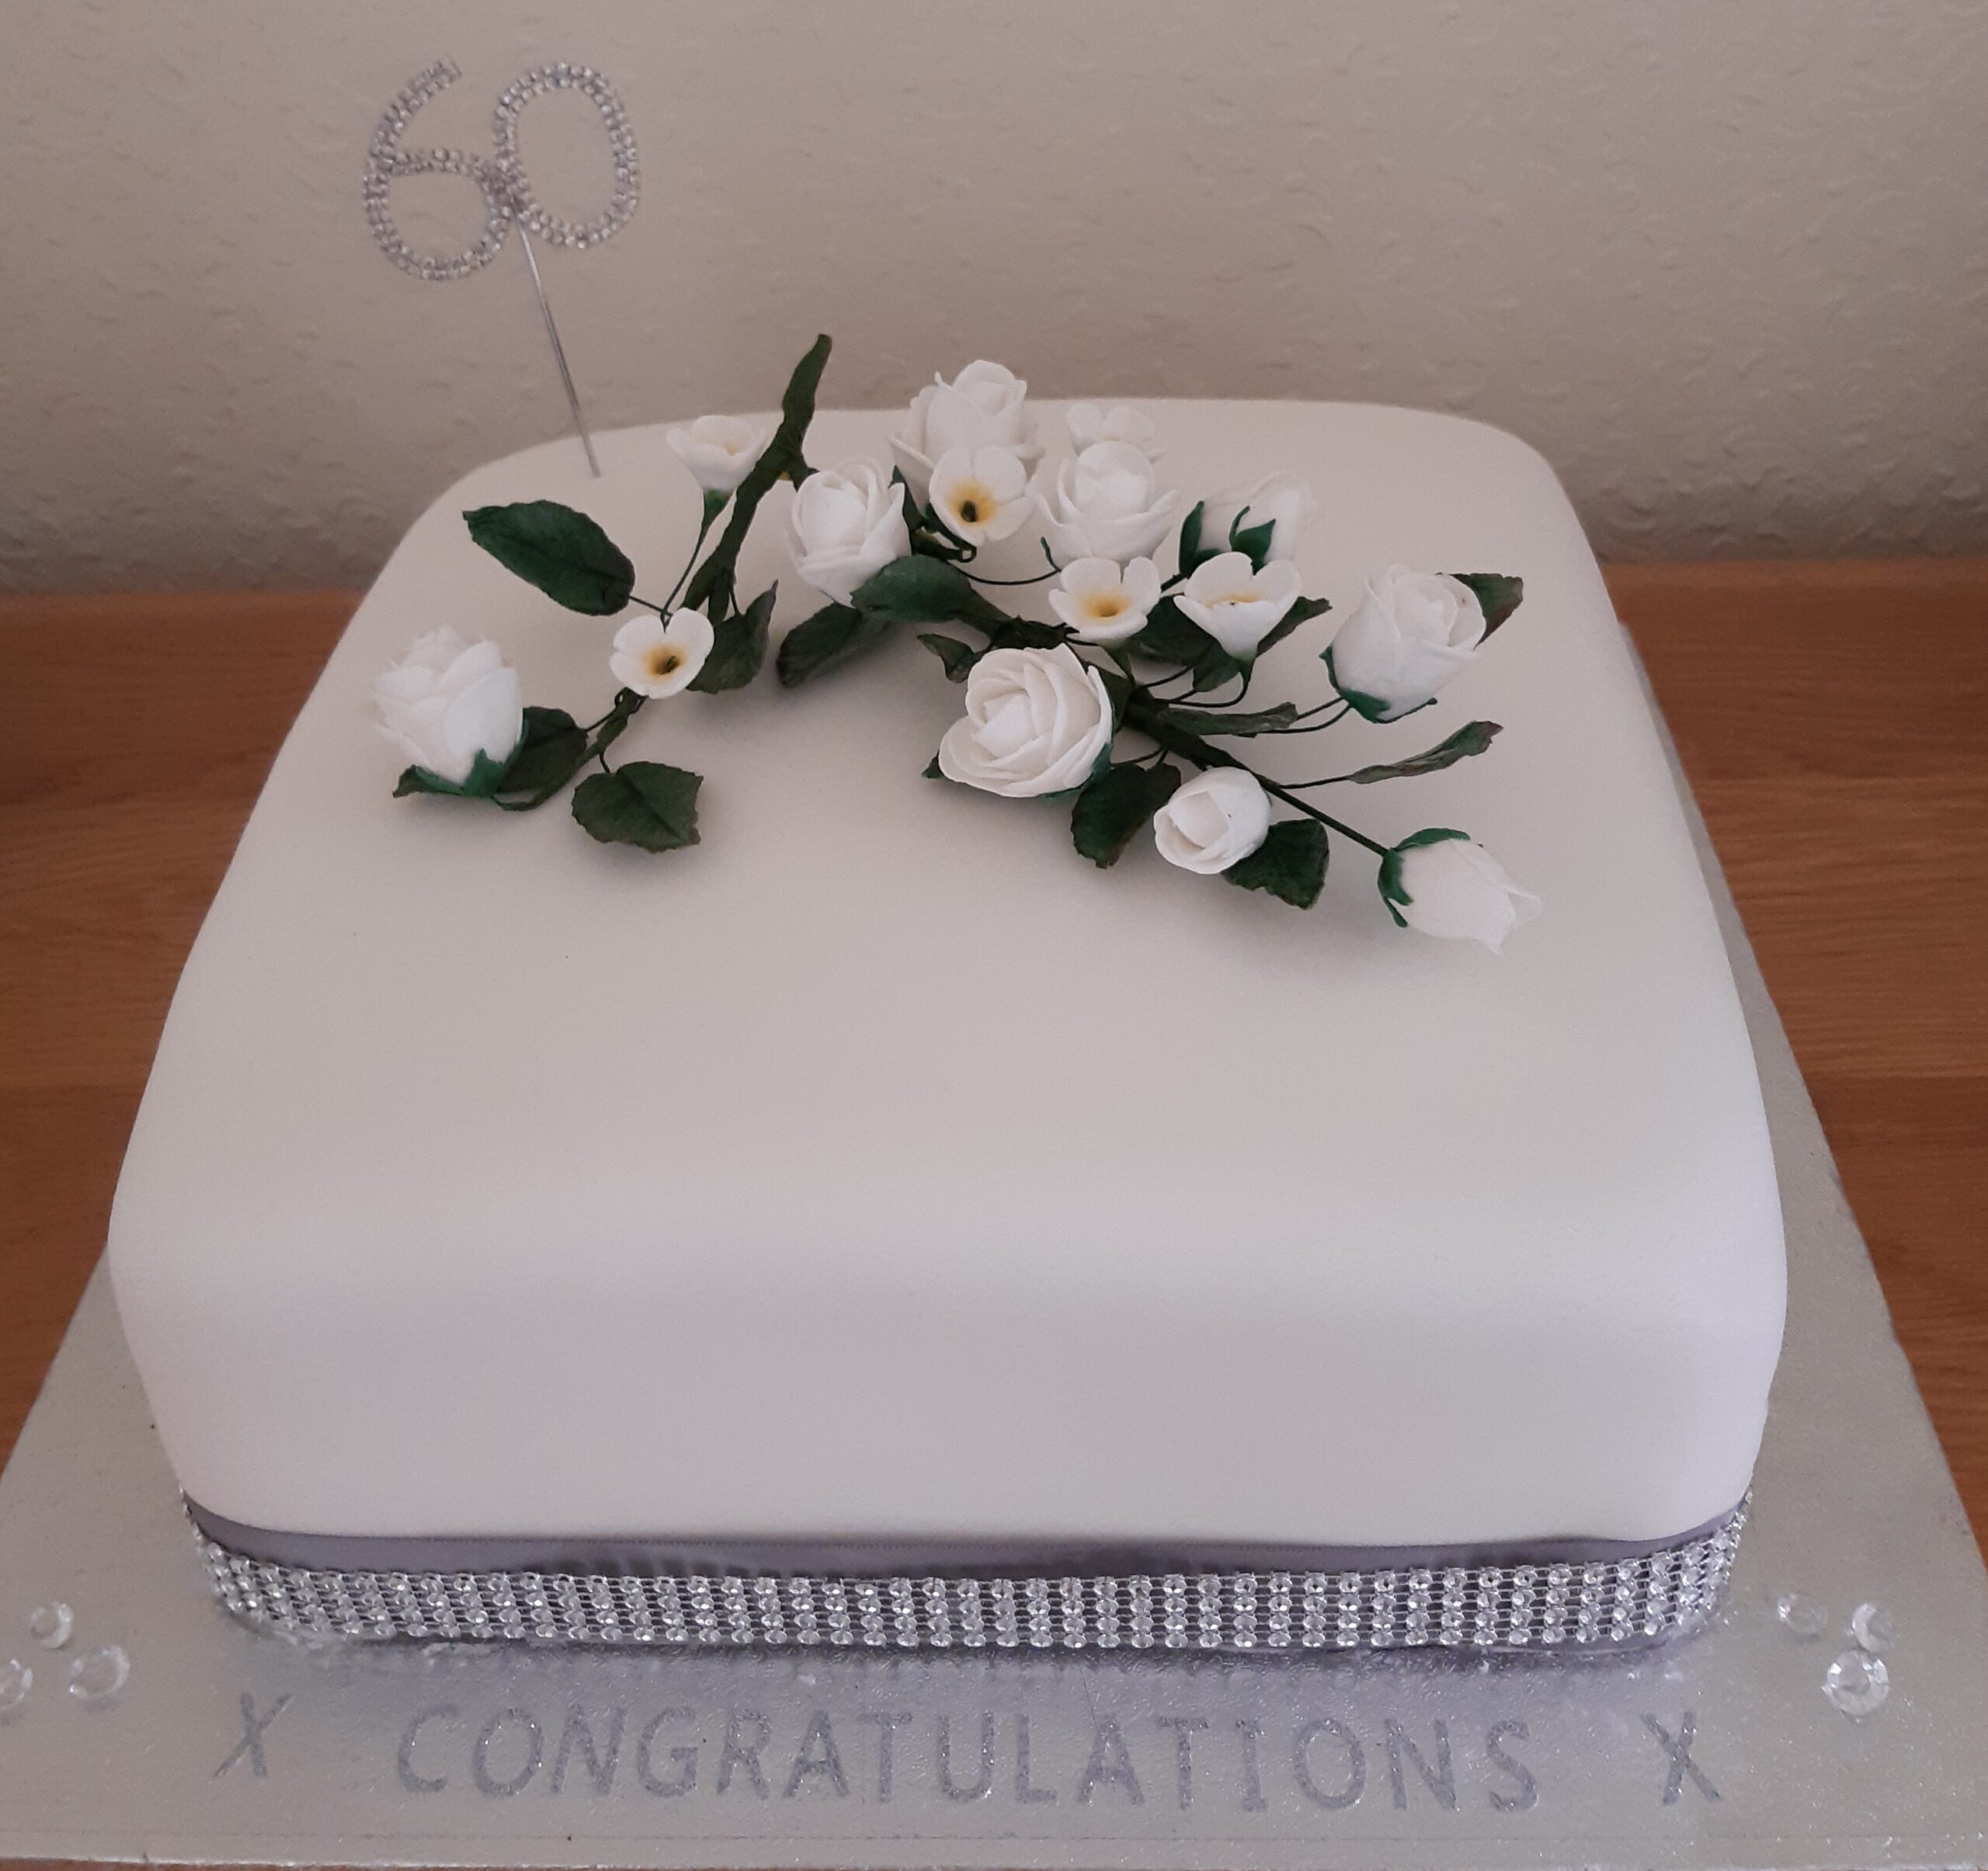 Happy Anniversary for Mom and Dad with Cake | Gift Portal Giftzbag.com